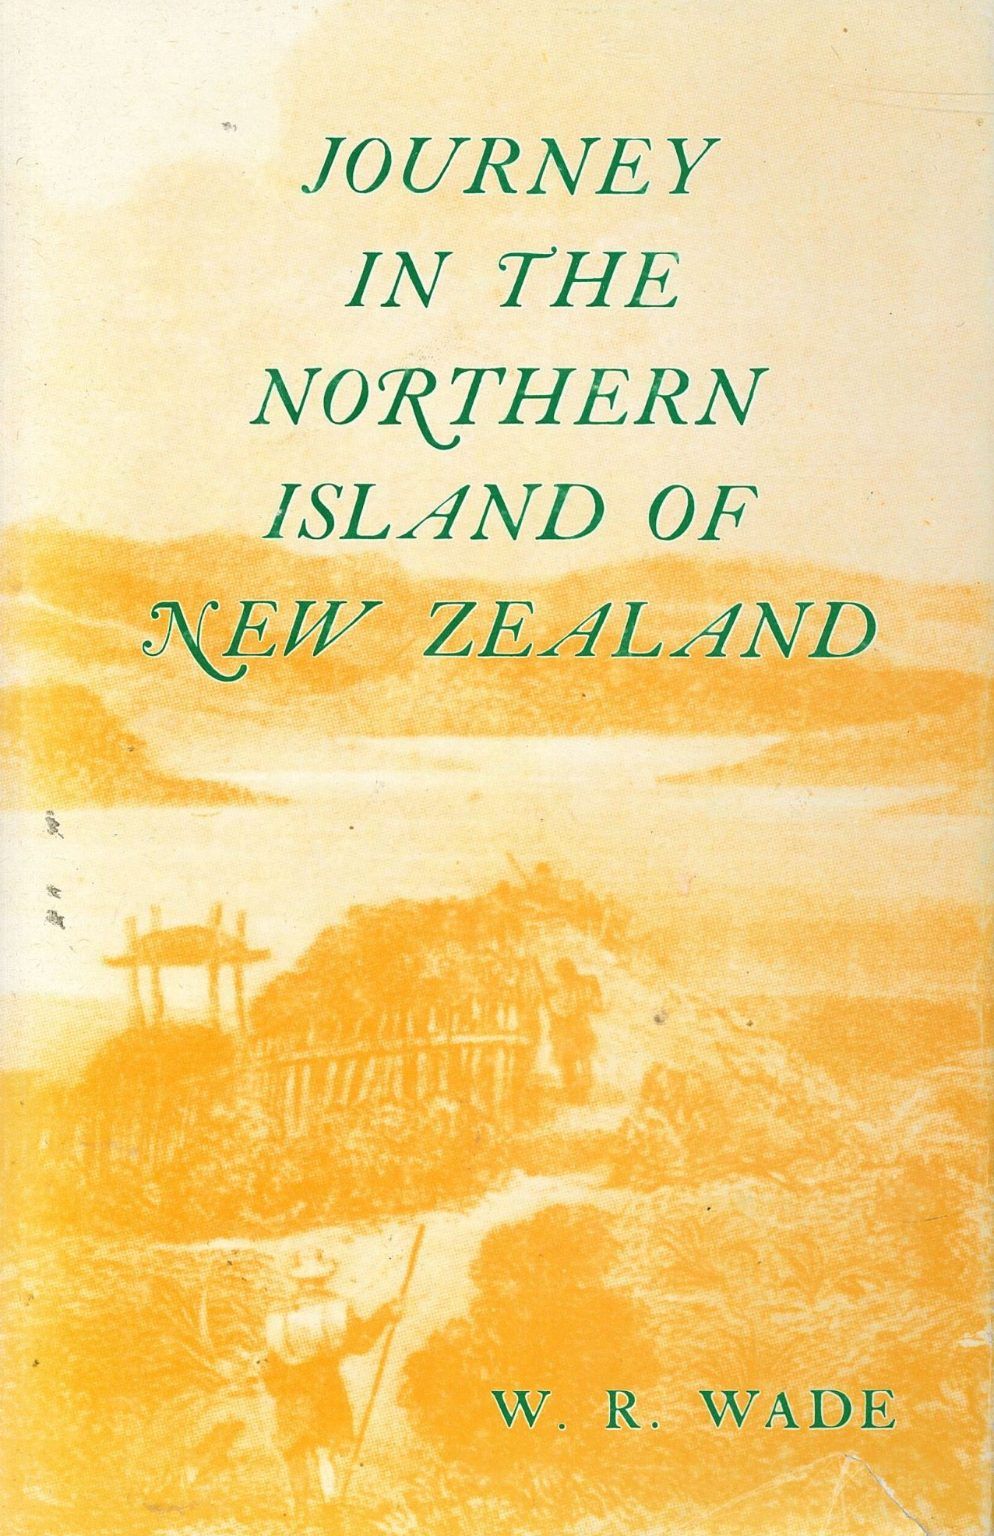 JOURNEY IN THE NORTHERN ISLAND OF NEW ZEALAND